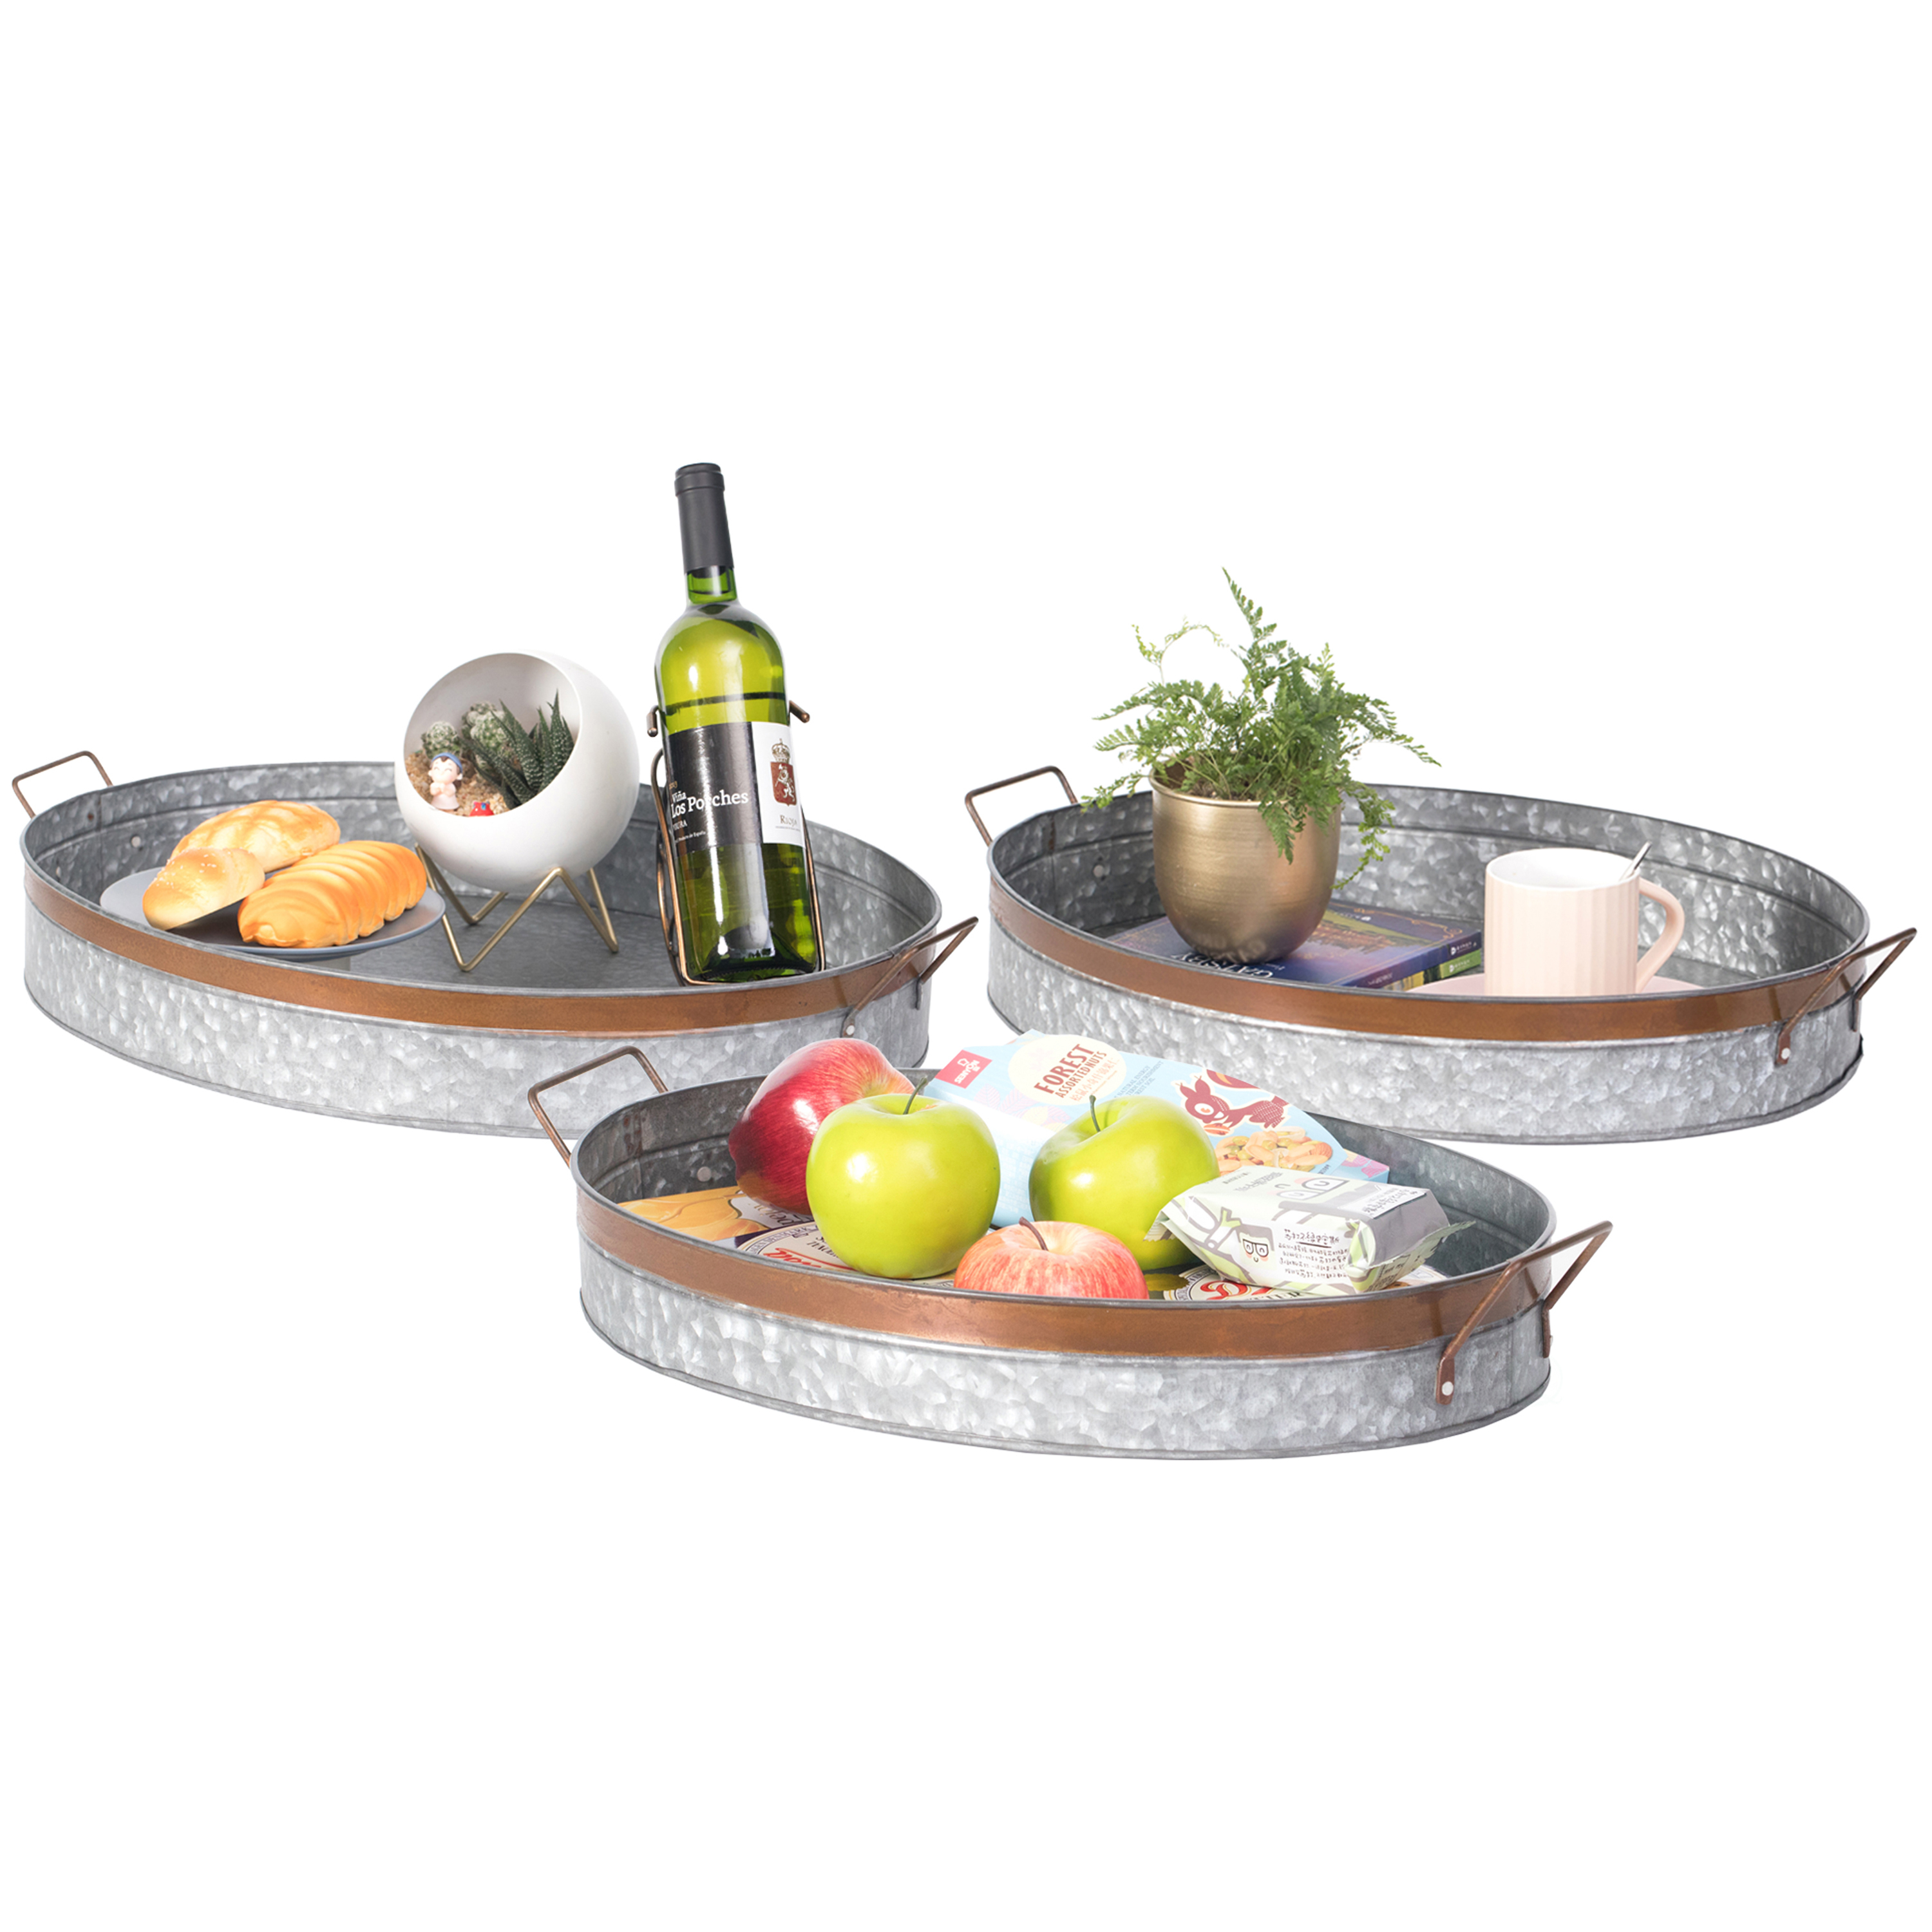 Galvanized Metal Oval Rustic Serving Tray With Handles - Set Of 3